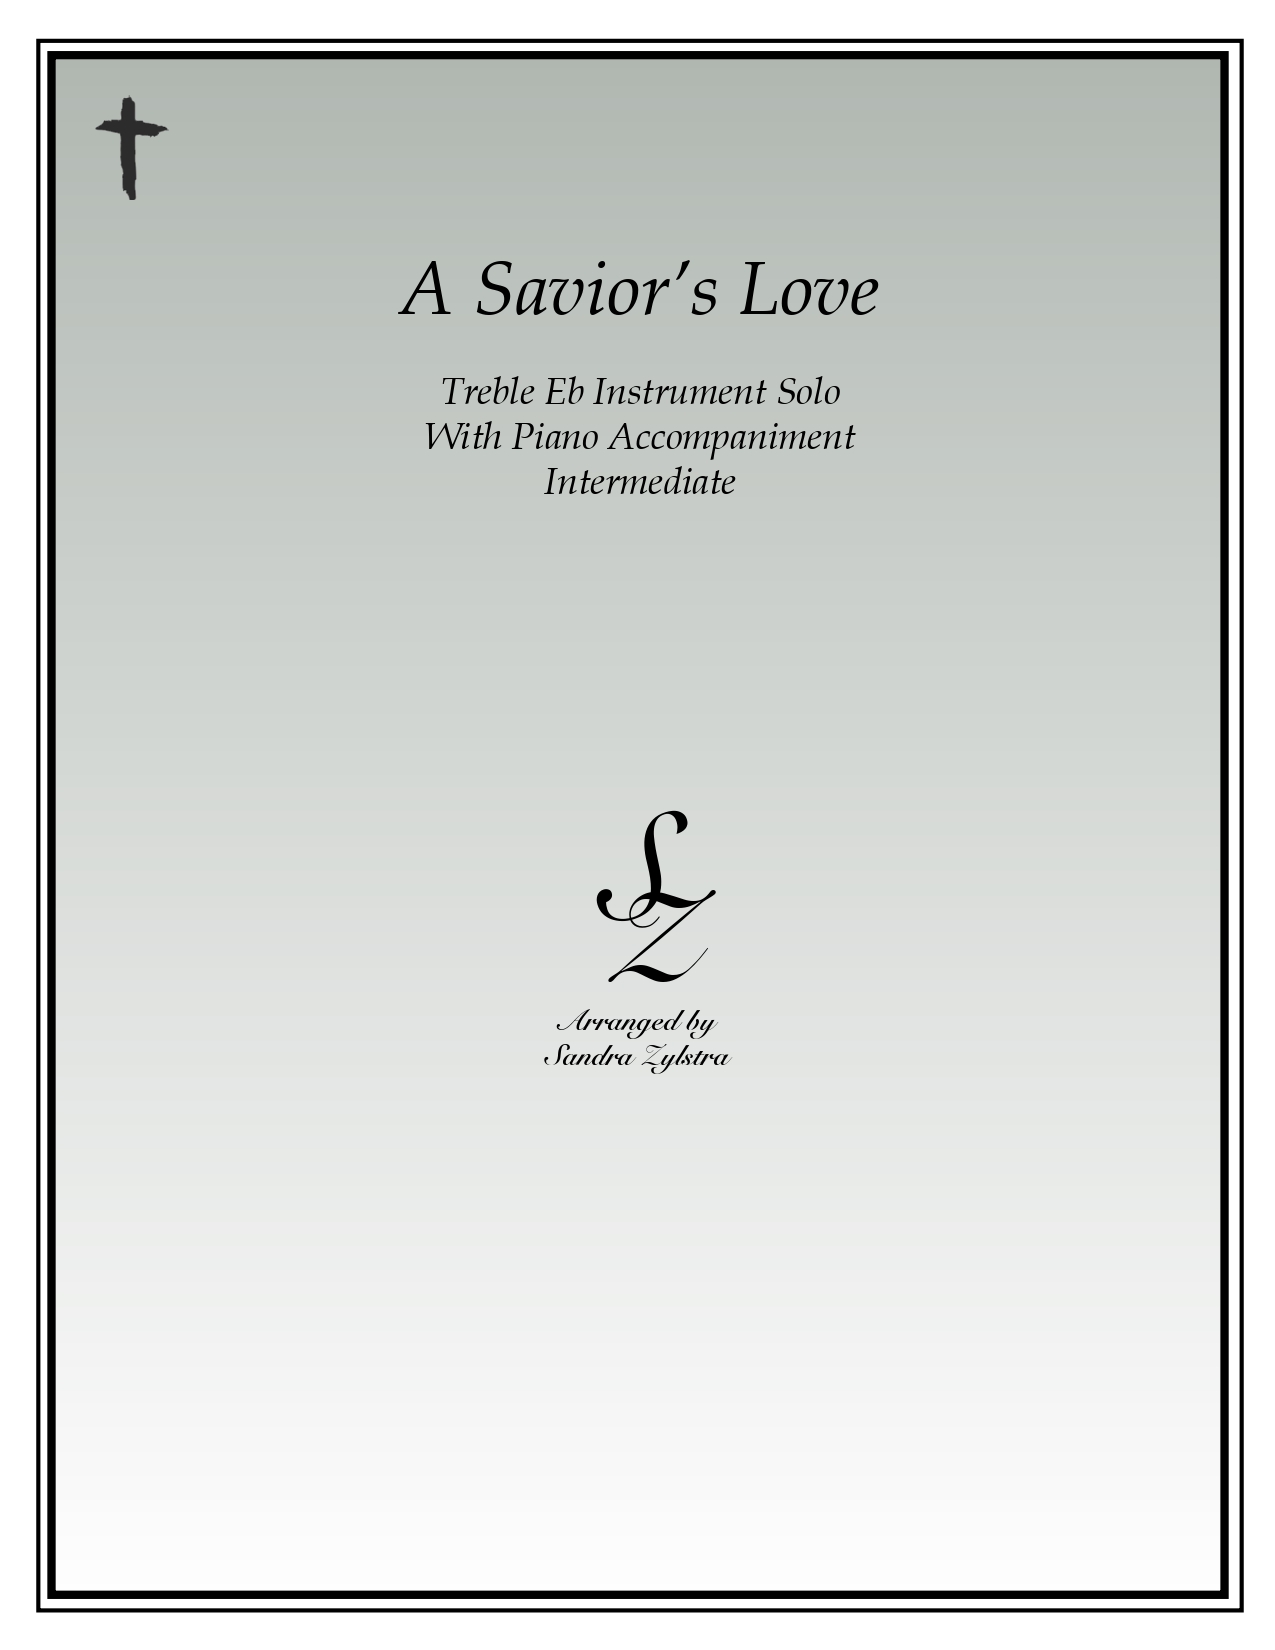 A Saviors Love Eb instrument solo part cover page 00011